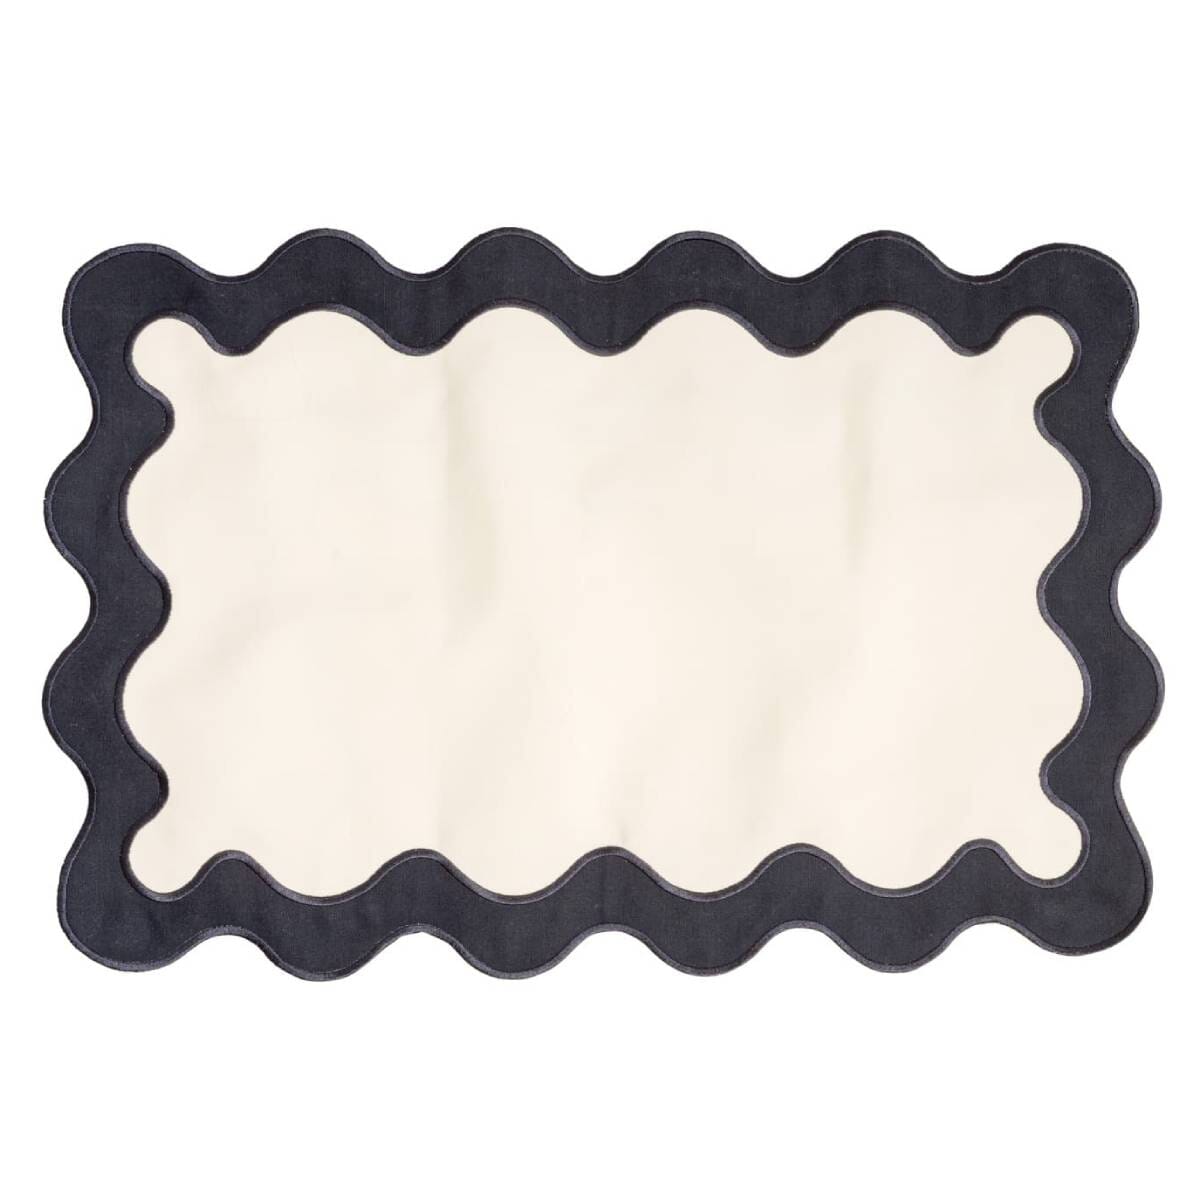 The Placemat - Rivie White | Business & Pleasure Co.